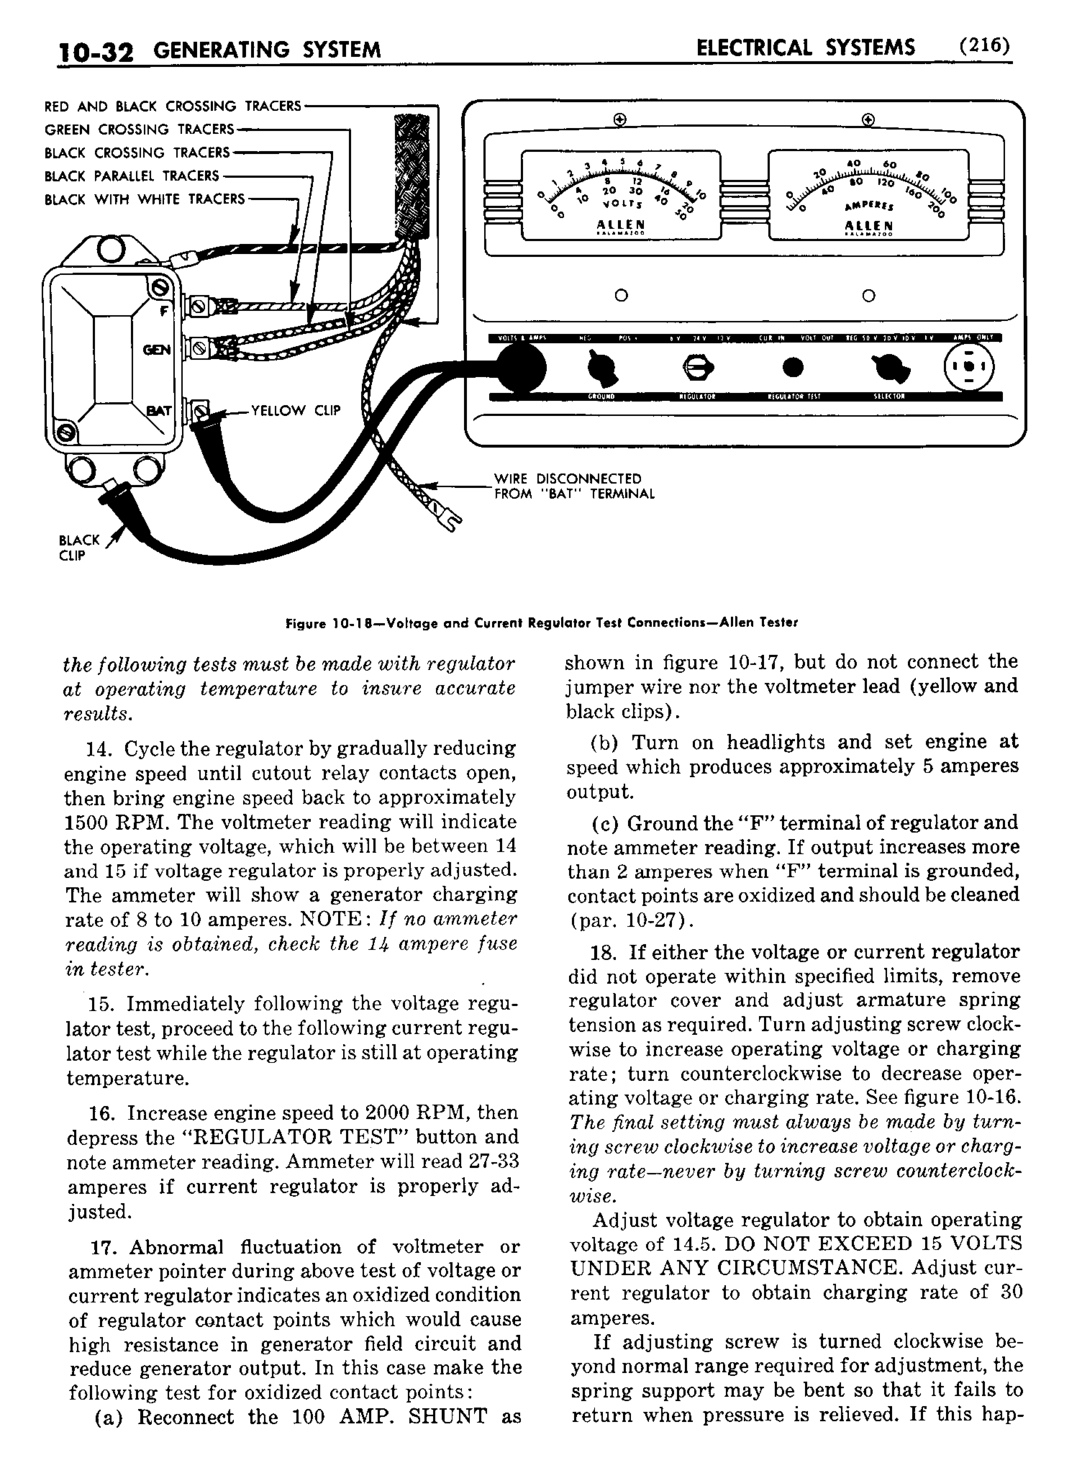 n_11 1953 Buick Shop Manual - Electrical Systems-032-032.jpg